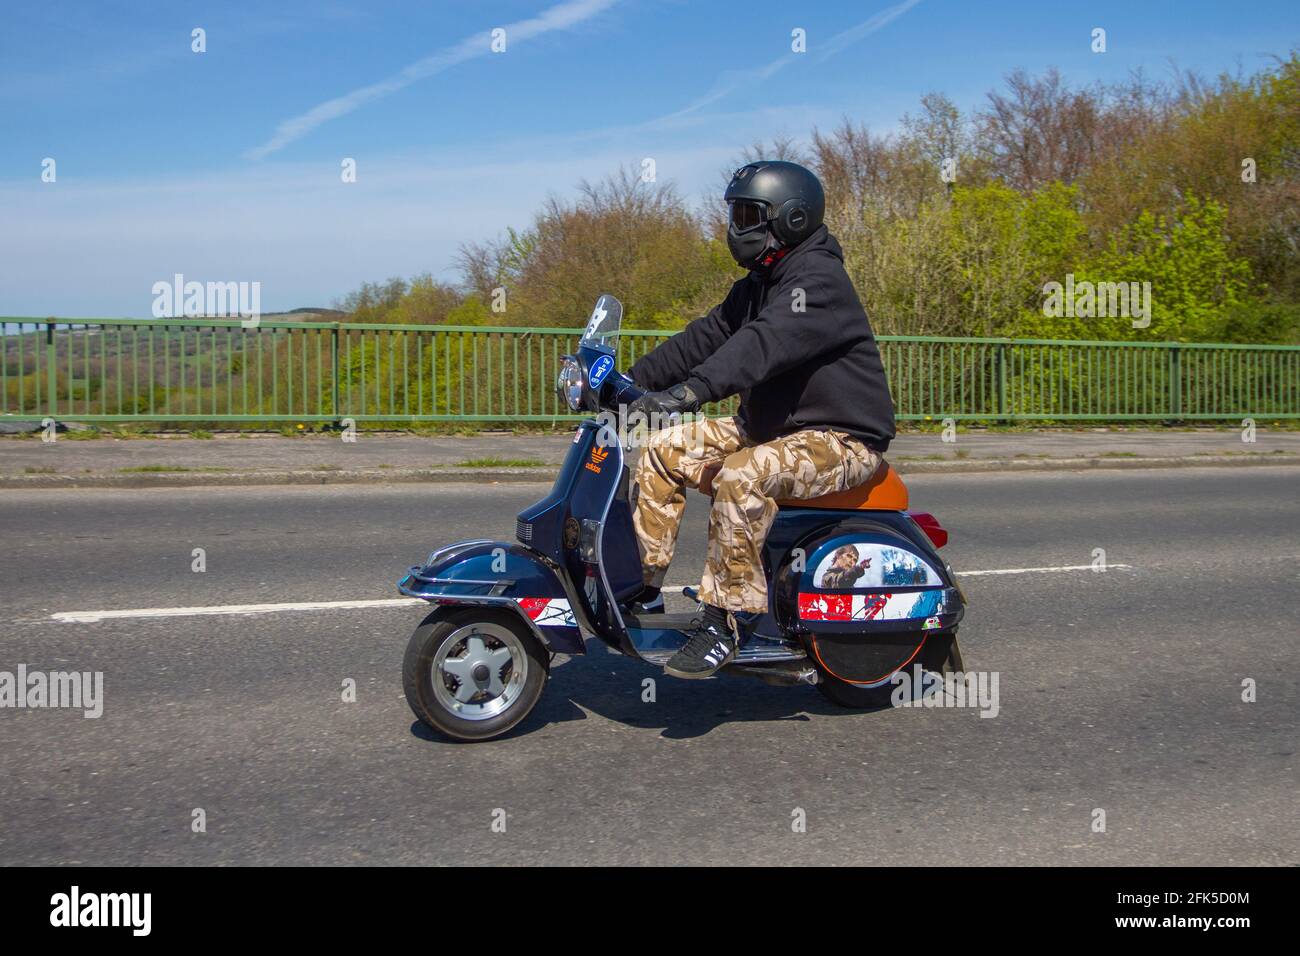 2006 Piaggio Px 125 Vespa scooter; Motorbike rider; two wheeled transport,  motorcycles, vehicle, roads, scooters, motorcycle bike riders motoring in  Chorley, UK Stock Photo - Alamy